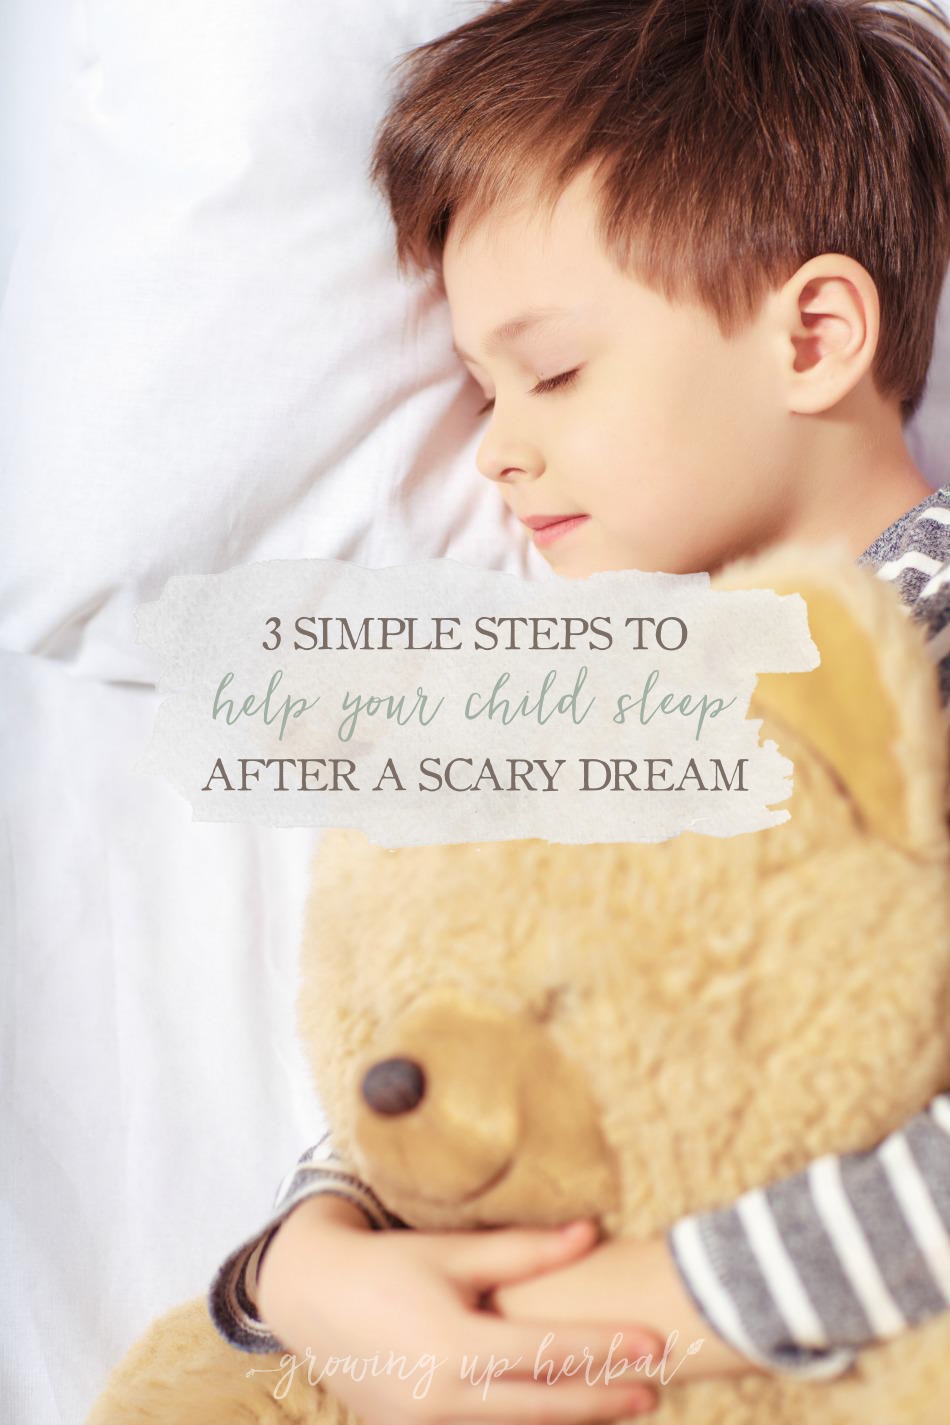 3 Simple Steps To Help Your Child Sleep After A Scary Dream | Growing Up Herbal | Childhood fears are normal. Here's how to support your child emotionally and help them through their fears at the same time.